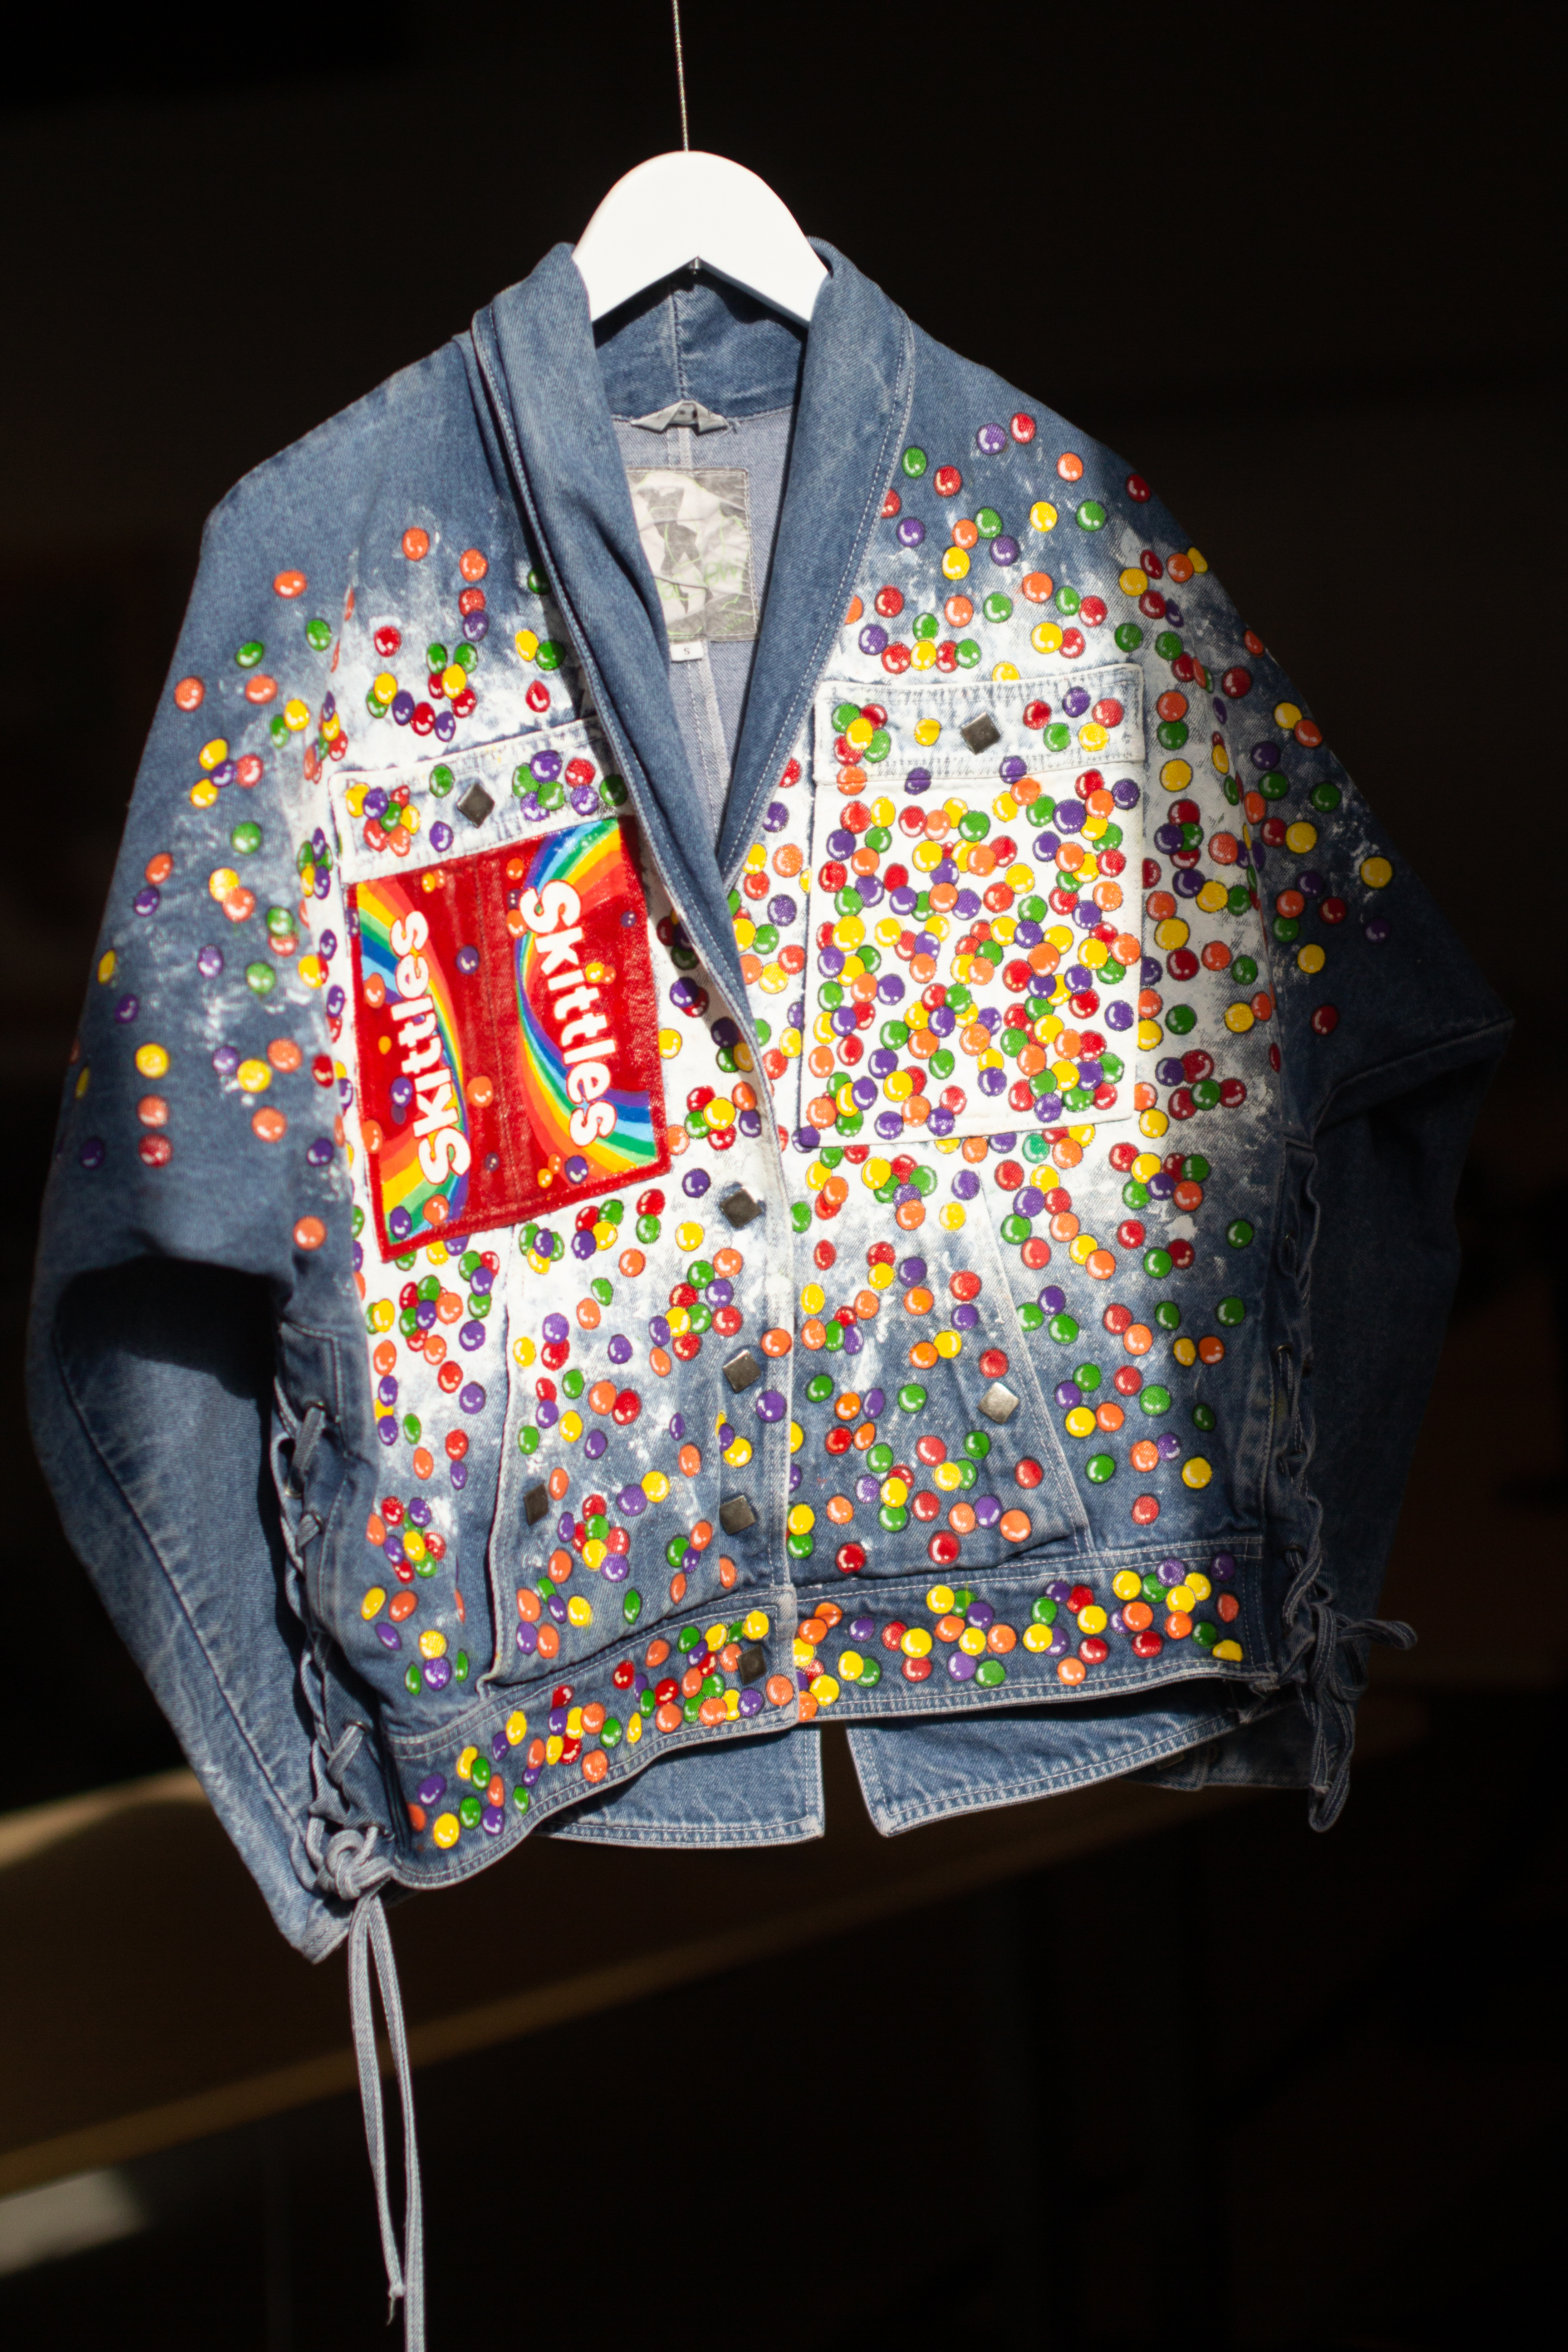 A jacket honoring Trayvon Martin is painted with Skittles, which the gunman who killed Martin said he mistook for a weapon.